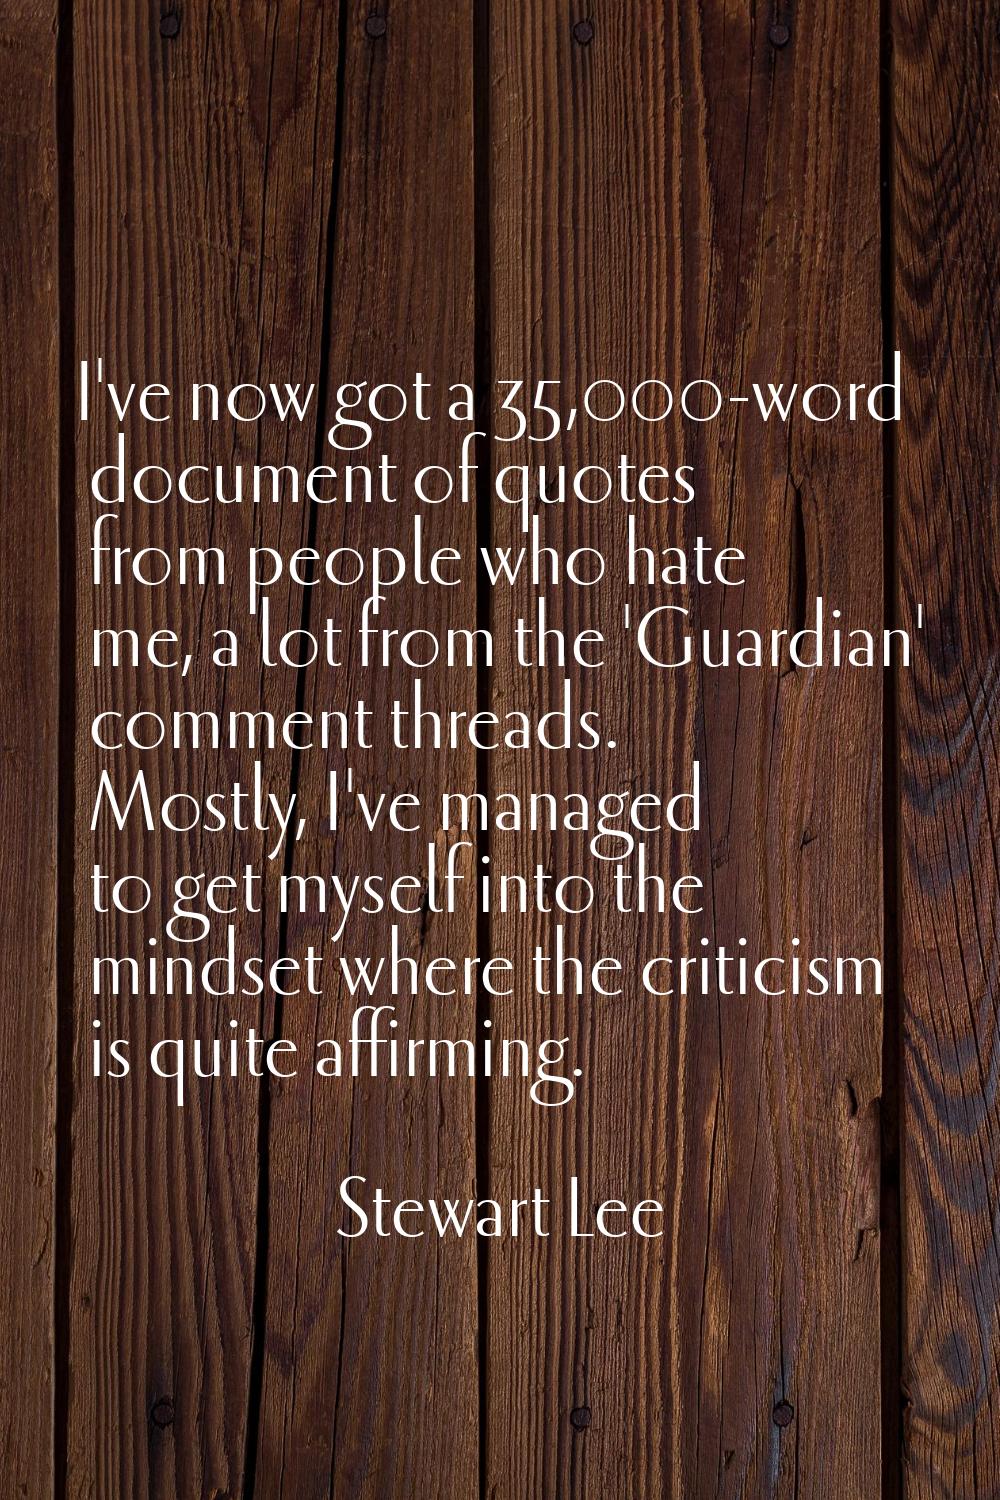 I've now got a 35,000-word document of quotes from people who hate me, a lot from the 'Guardian' co